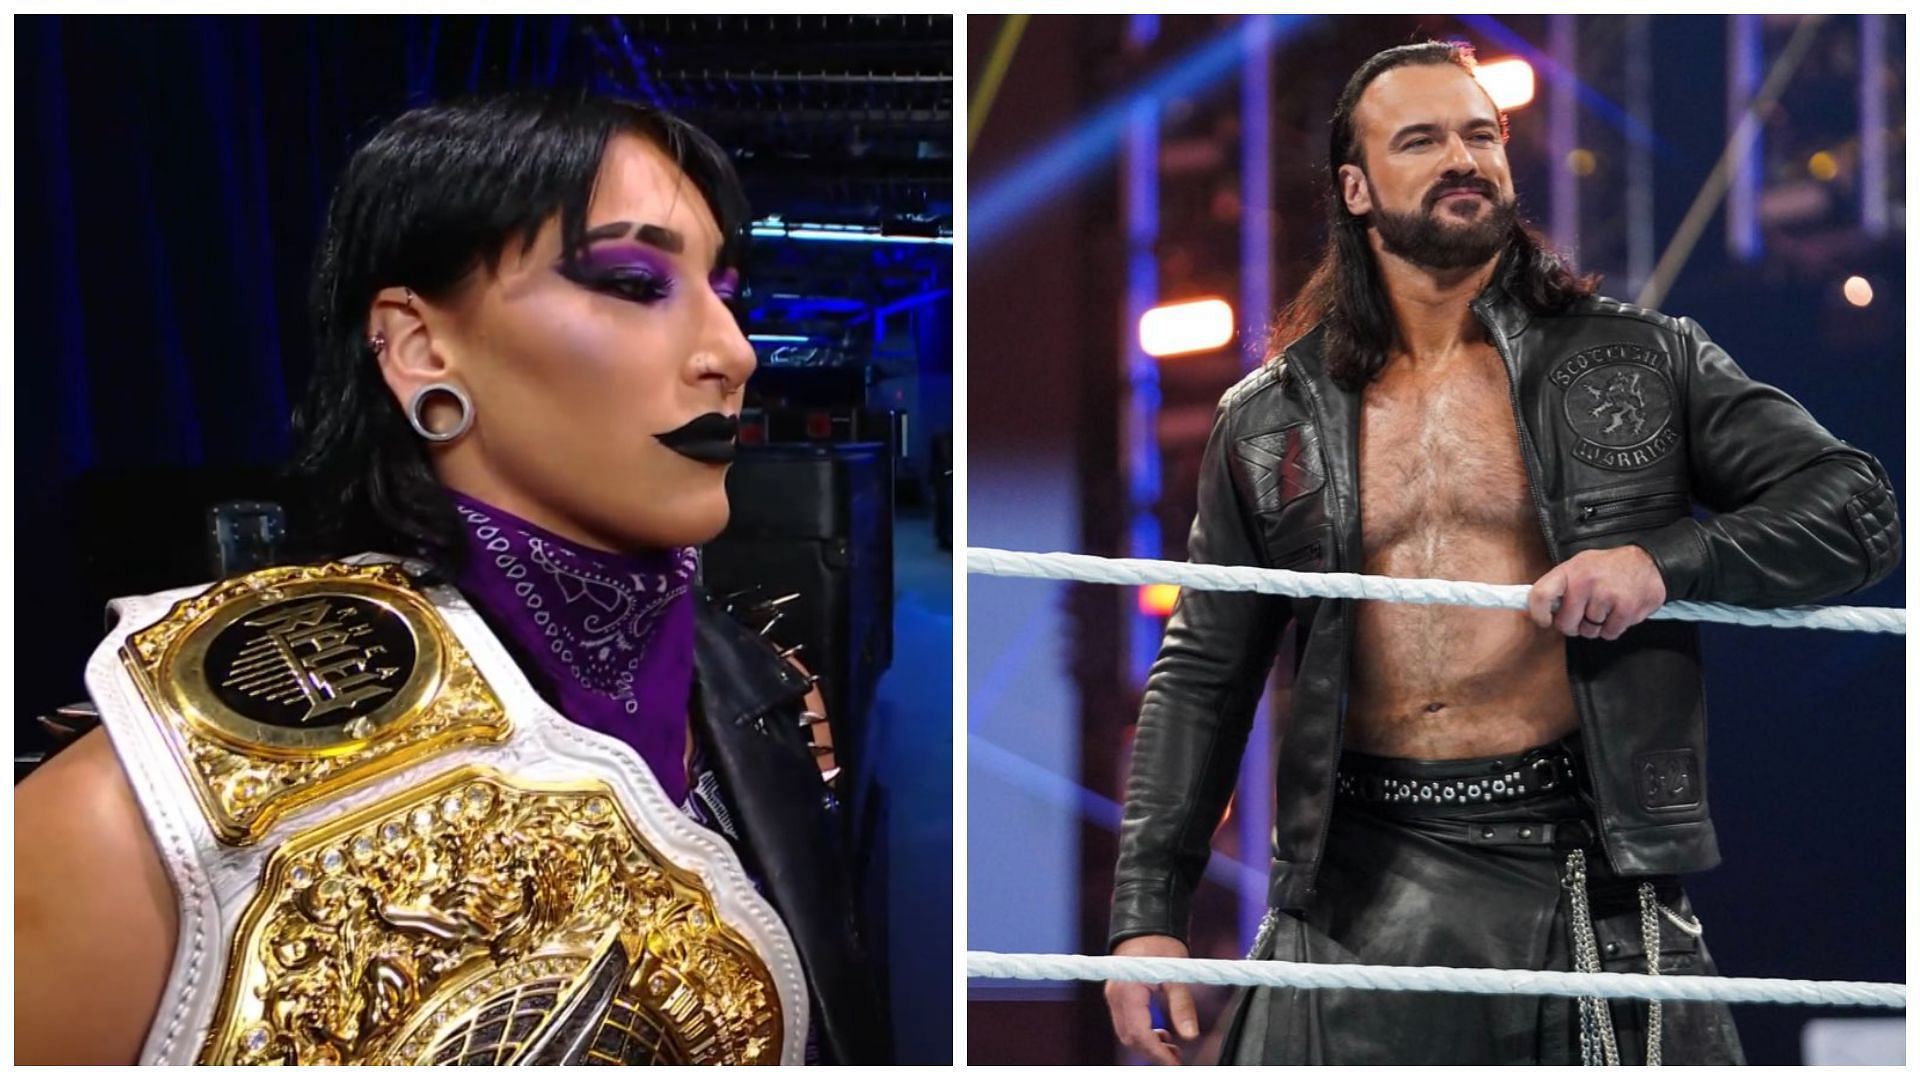 Rhea Ripley and Drew McIntyre were seen together in a backstage segment.